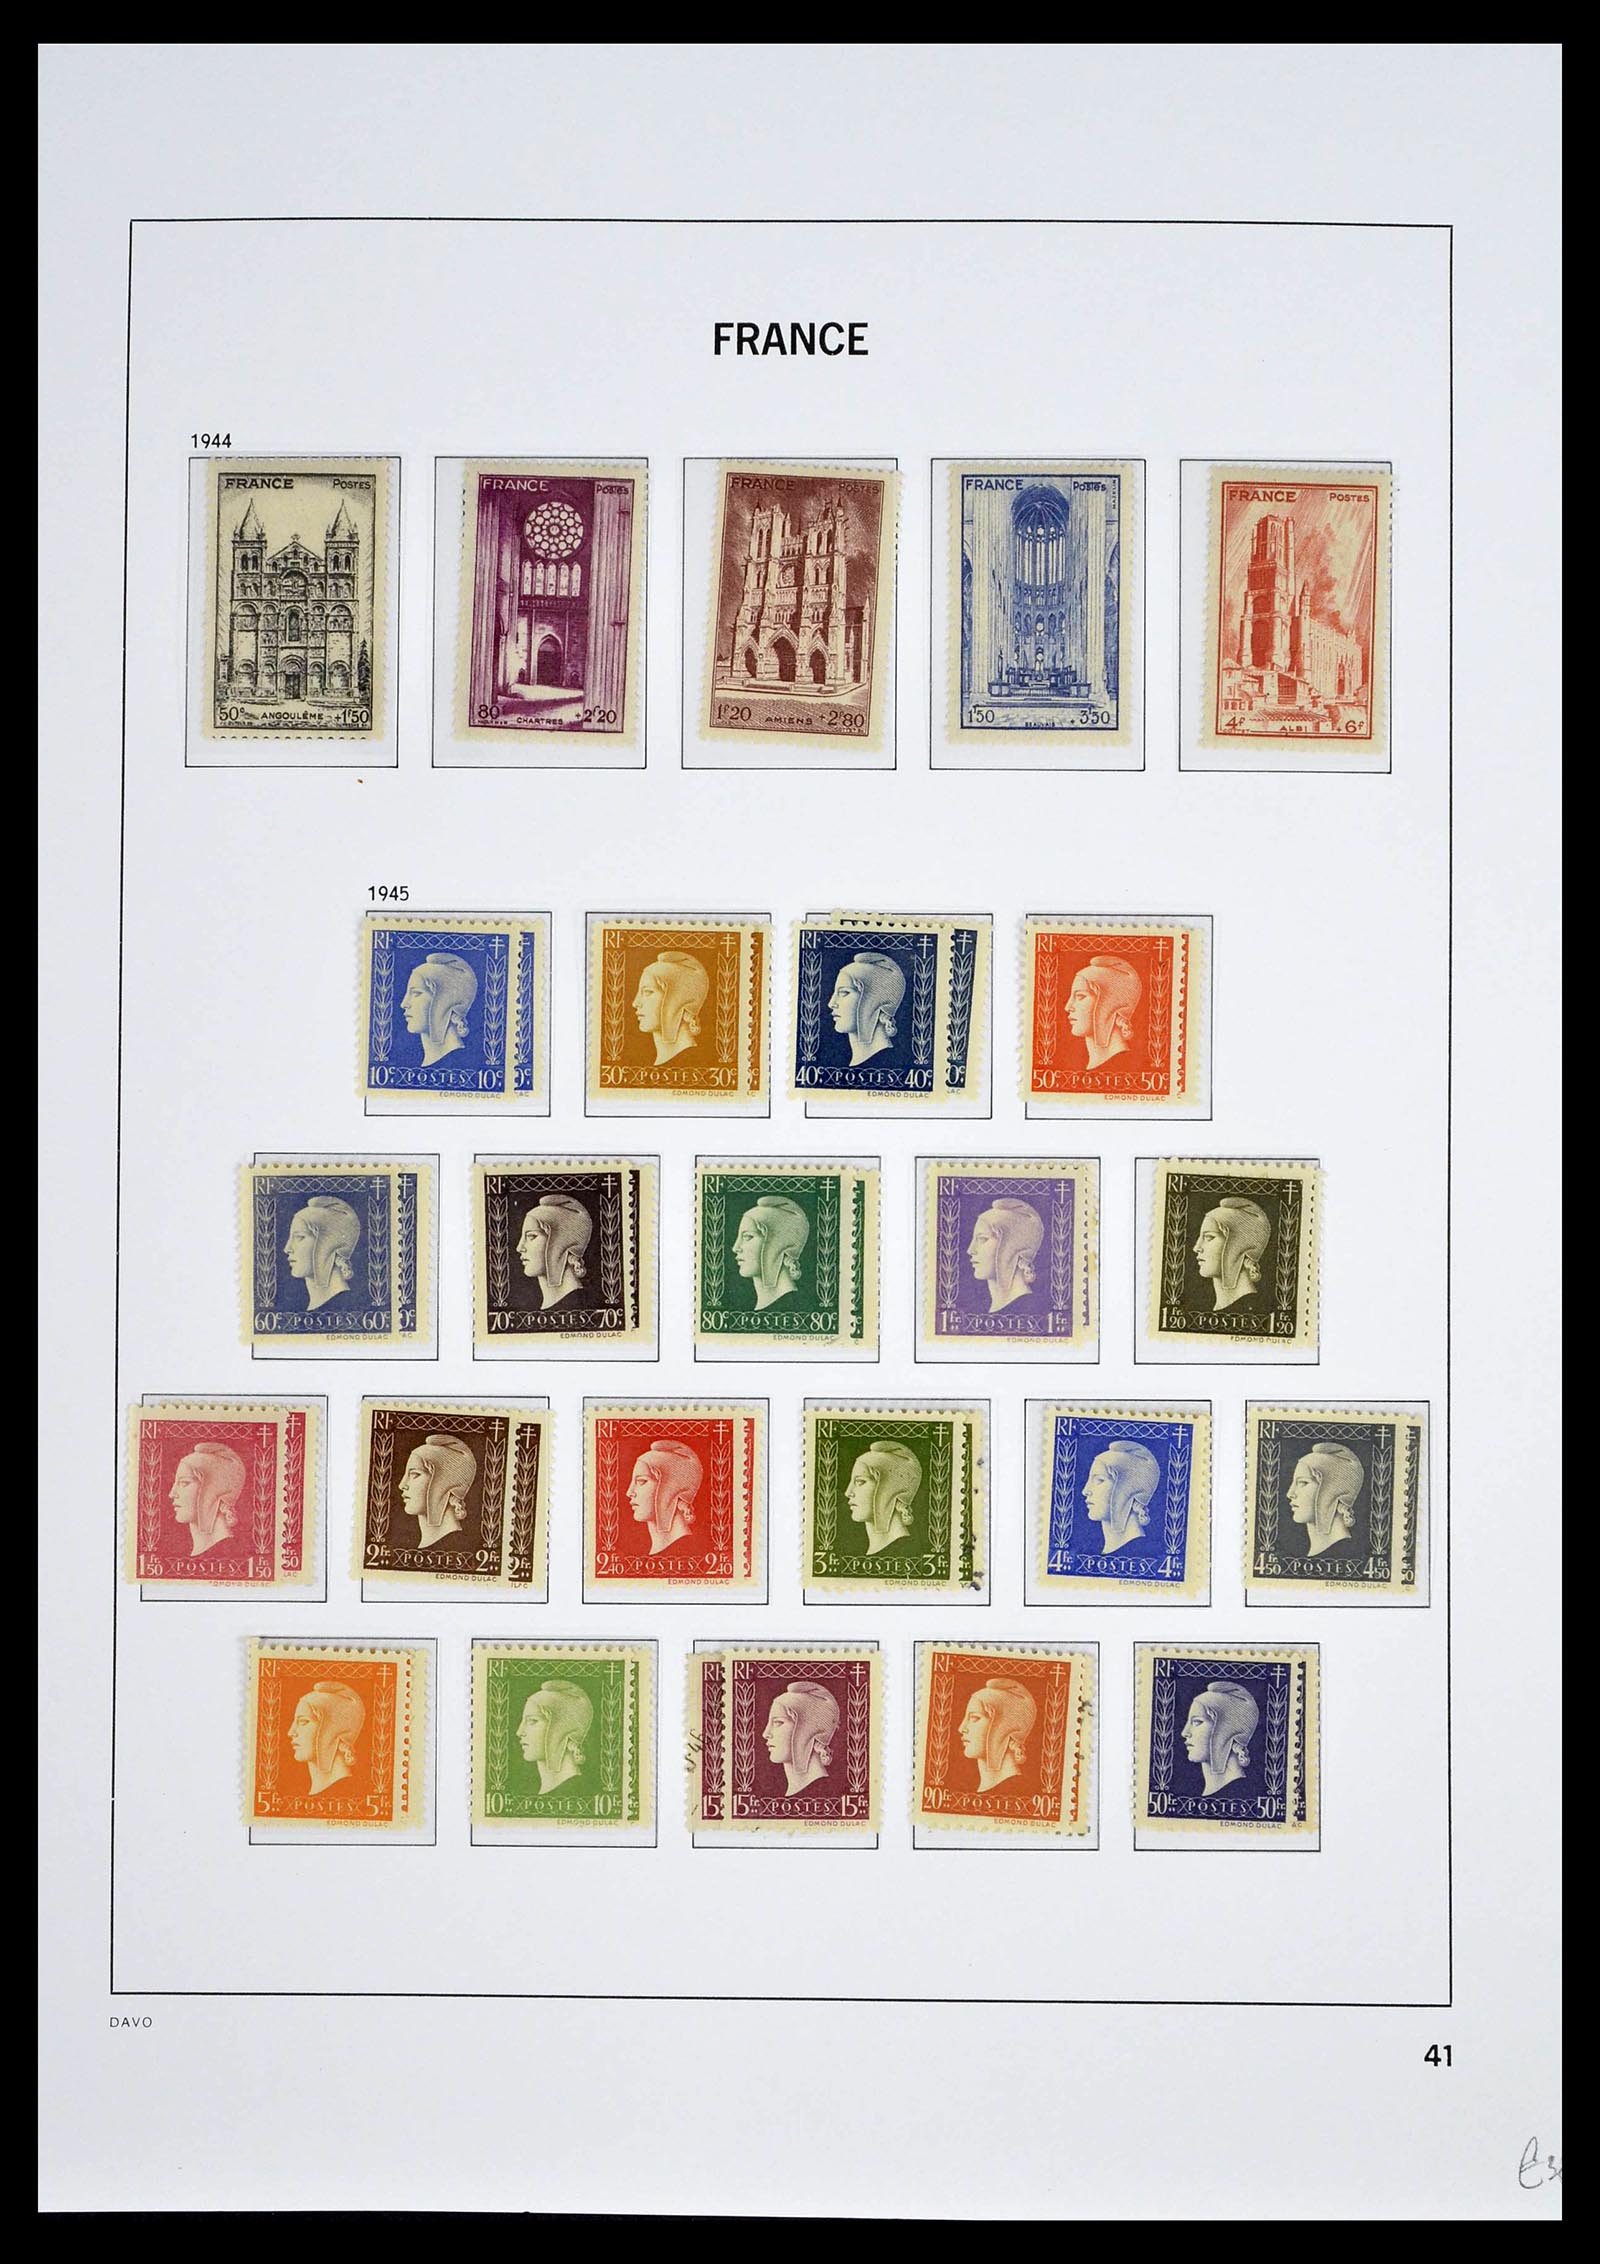 39335 0056 - Stamp collection 39335 France 1849-1969.